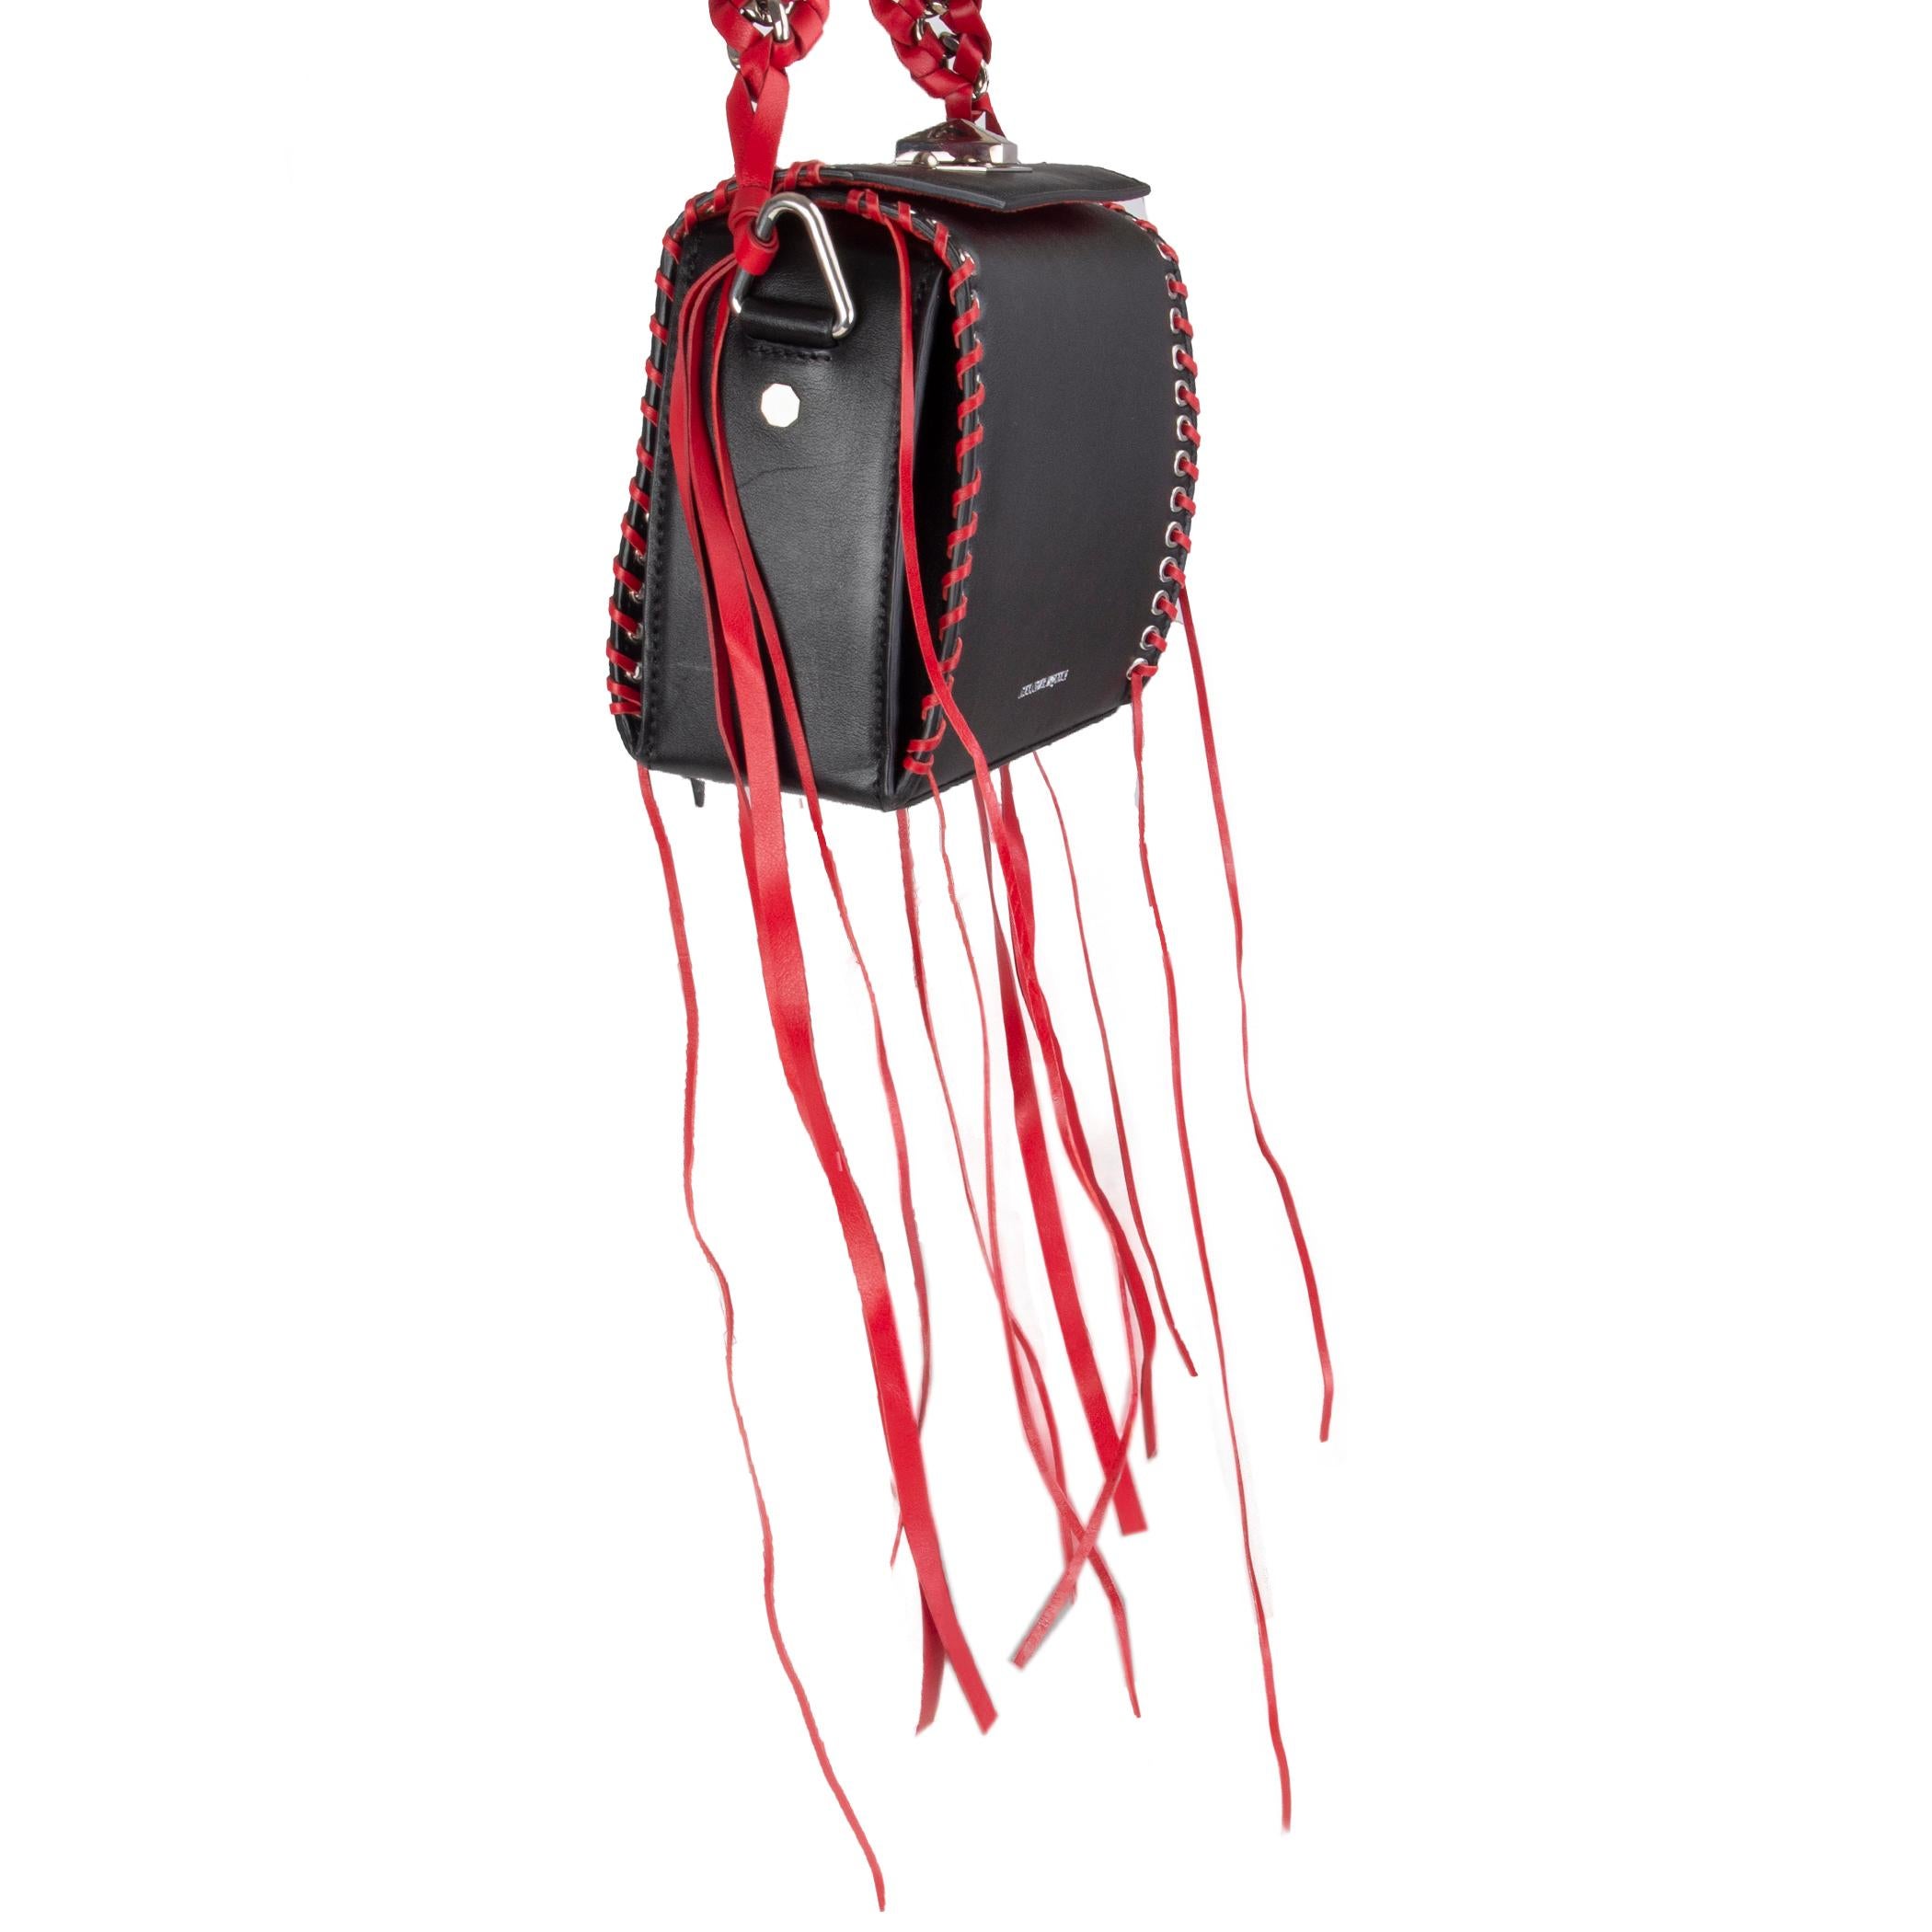 Alexander McQueen 'Box 19' shoulder bag in black leather with silver-tone eyelits and read leather whipstitch details and red leather and chain handle. Detachable shoulder strap. Opens with a turn-lock on top. Inside is divided into three